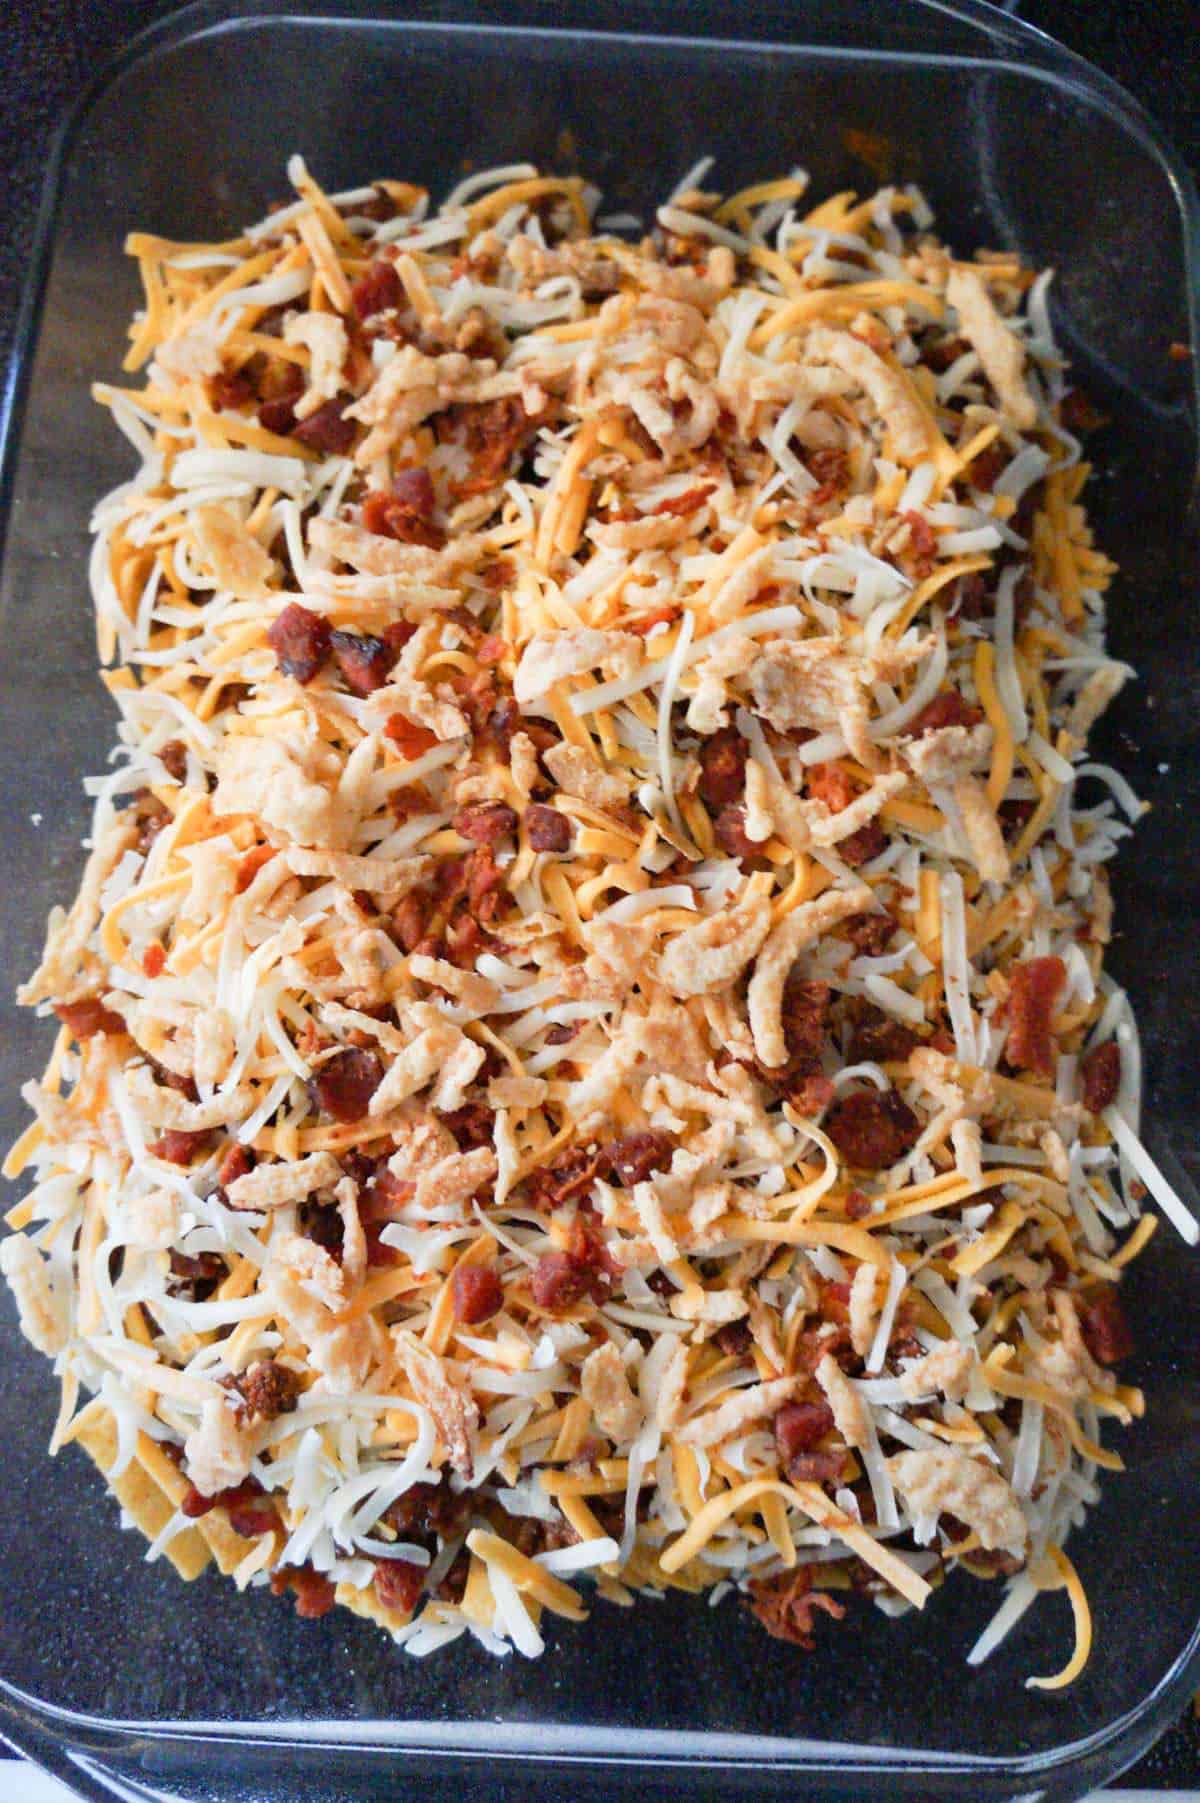 french's fried onions, crumbled bacon and shredded cheese on top of frito pie before baking